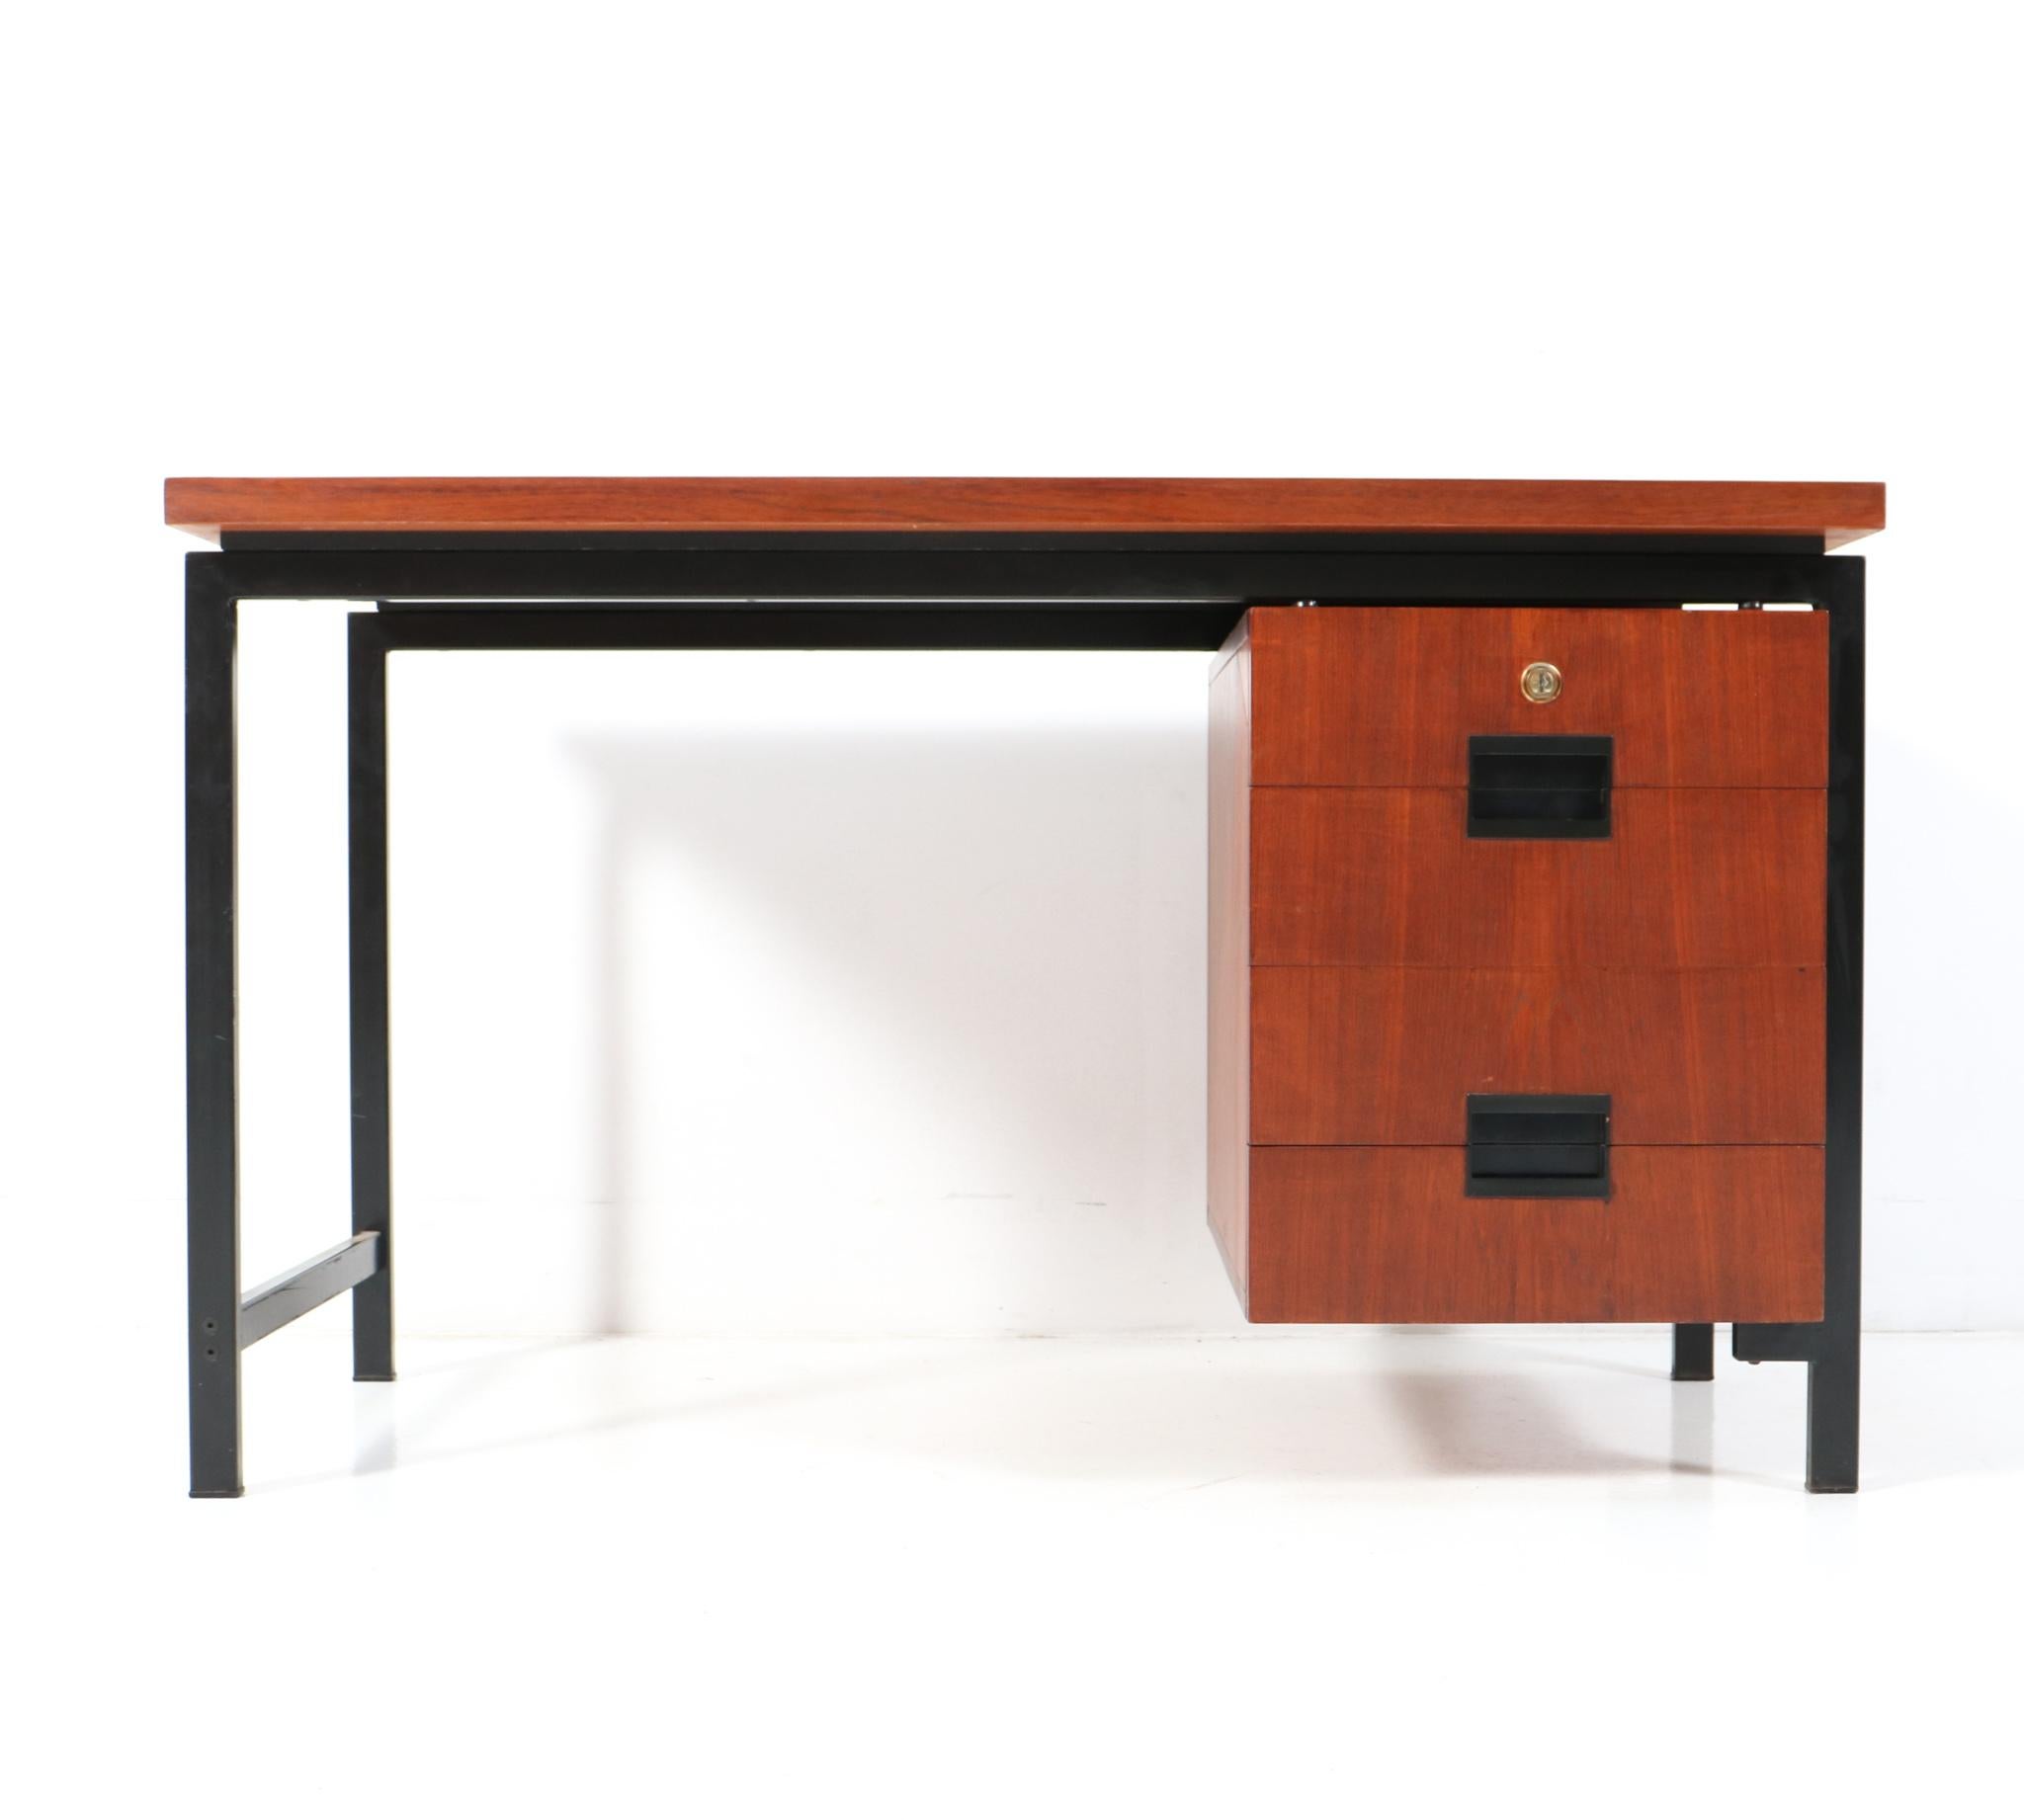 Petite and rare small Mid-Century Modern Japanese Series EU-01 desk.
Design by Cees Braakman for Pastoe.
Striking Dutch design from the 1950s.
Black lacquered metal frame with original teak veneered top and original teak veneered floating drawer